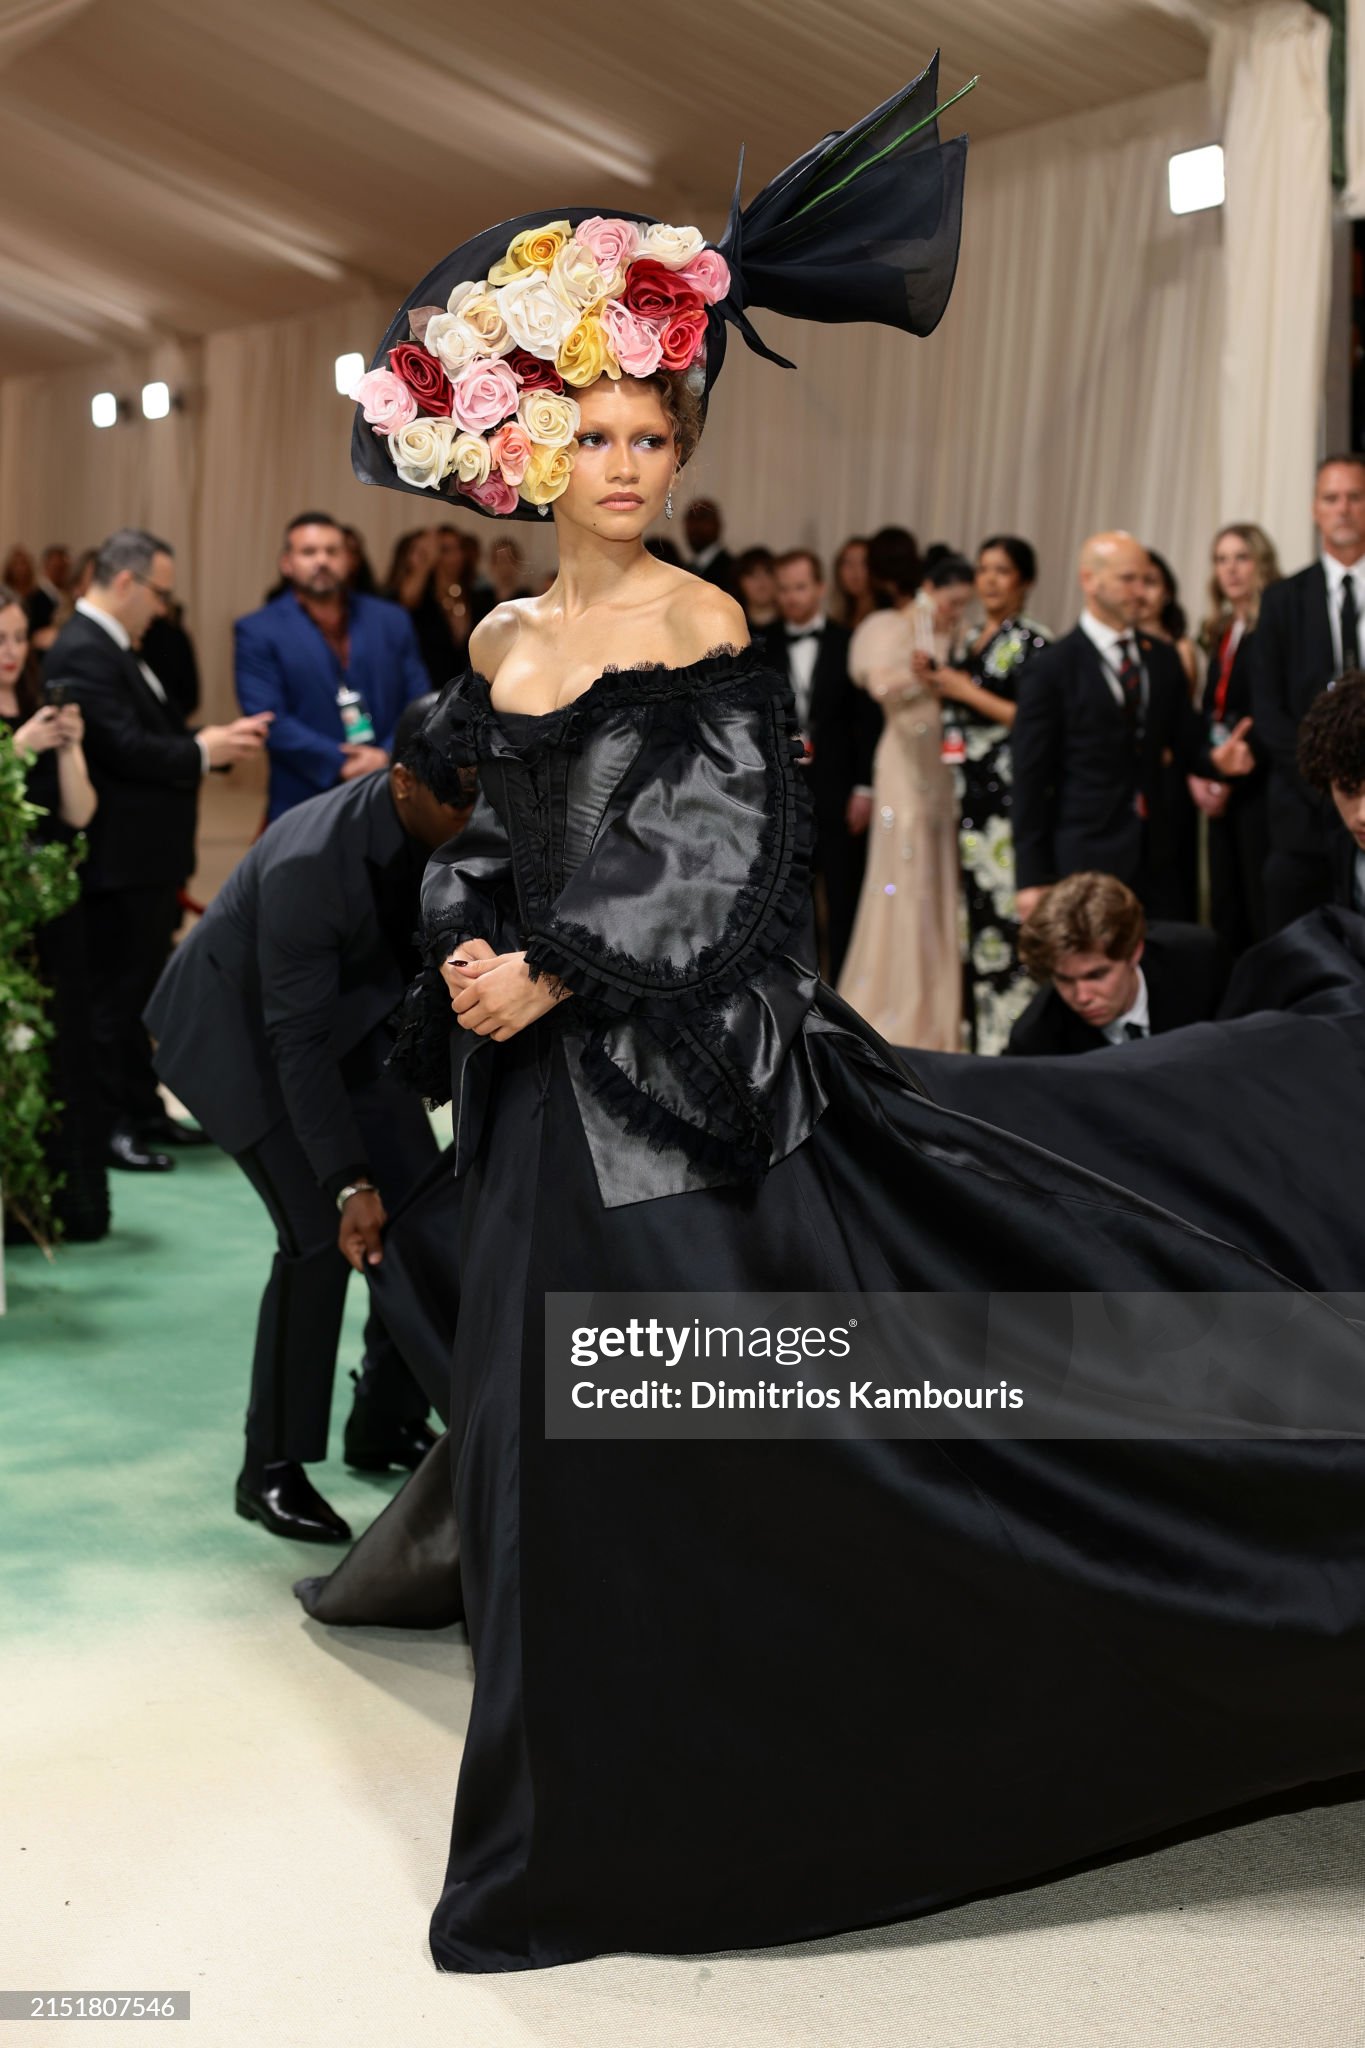 gettyimages-2151807546-2048x2048.jpg